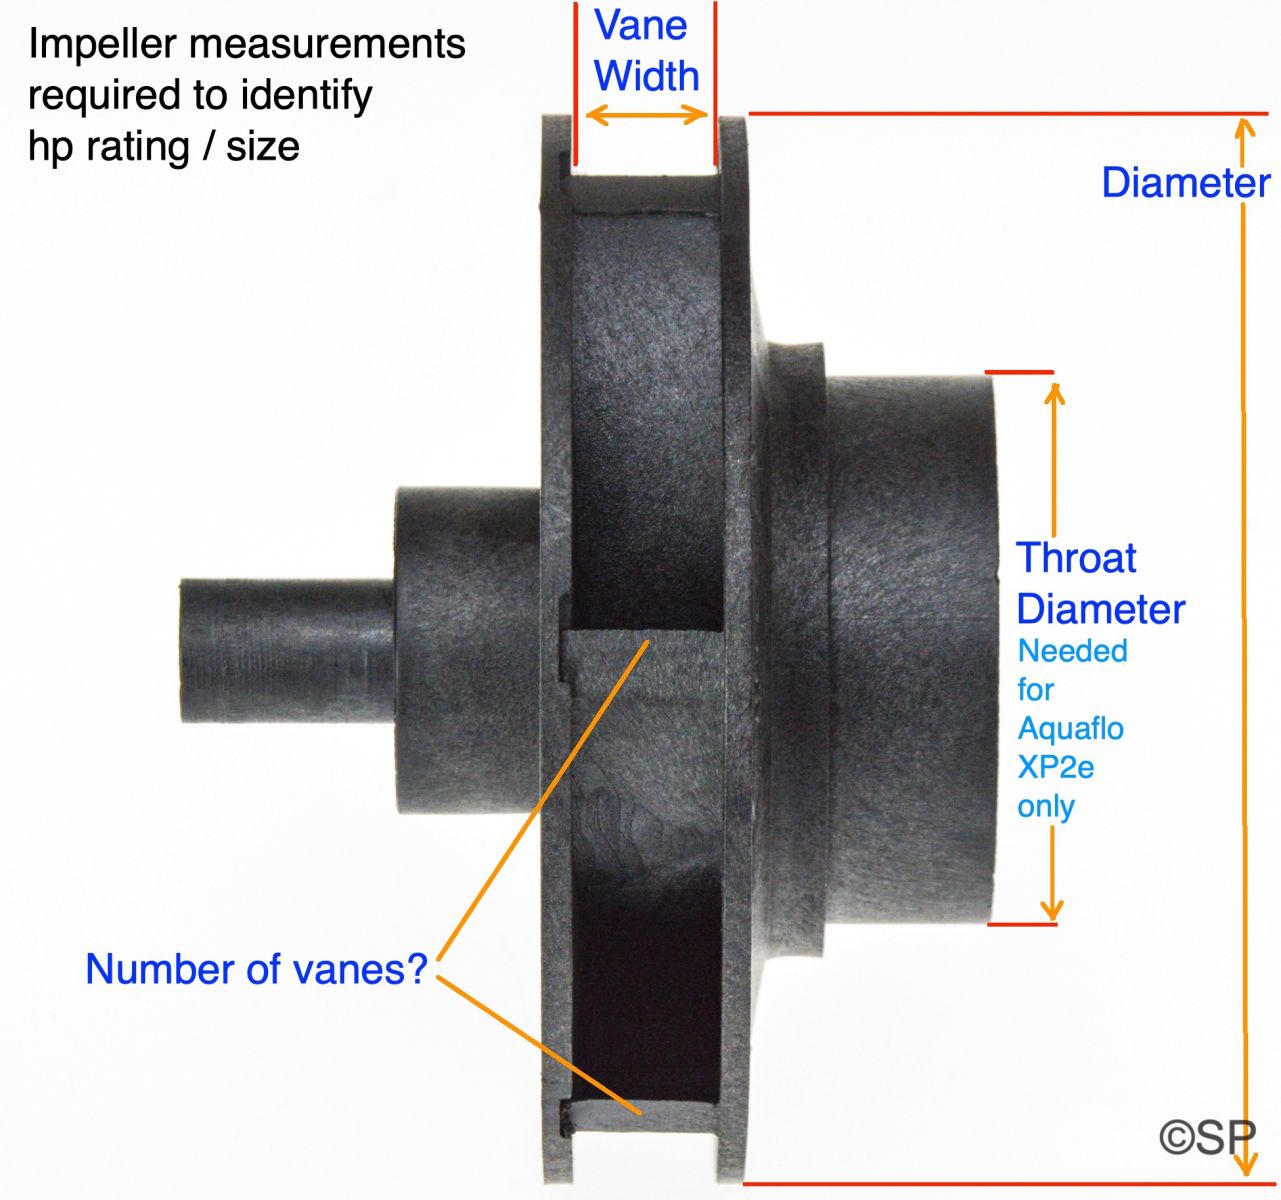 spa pump impeller measurements required to ID hp rating